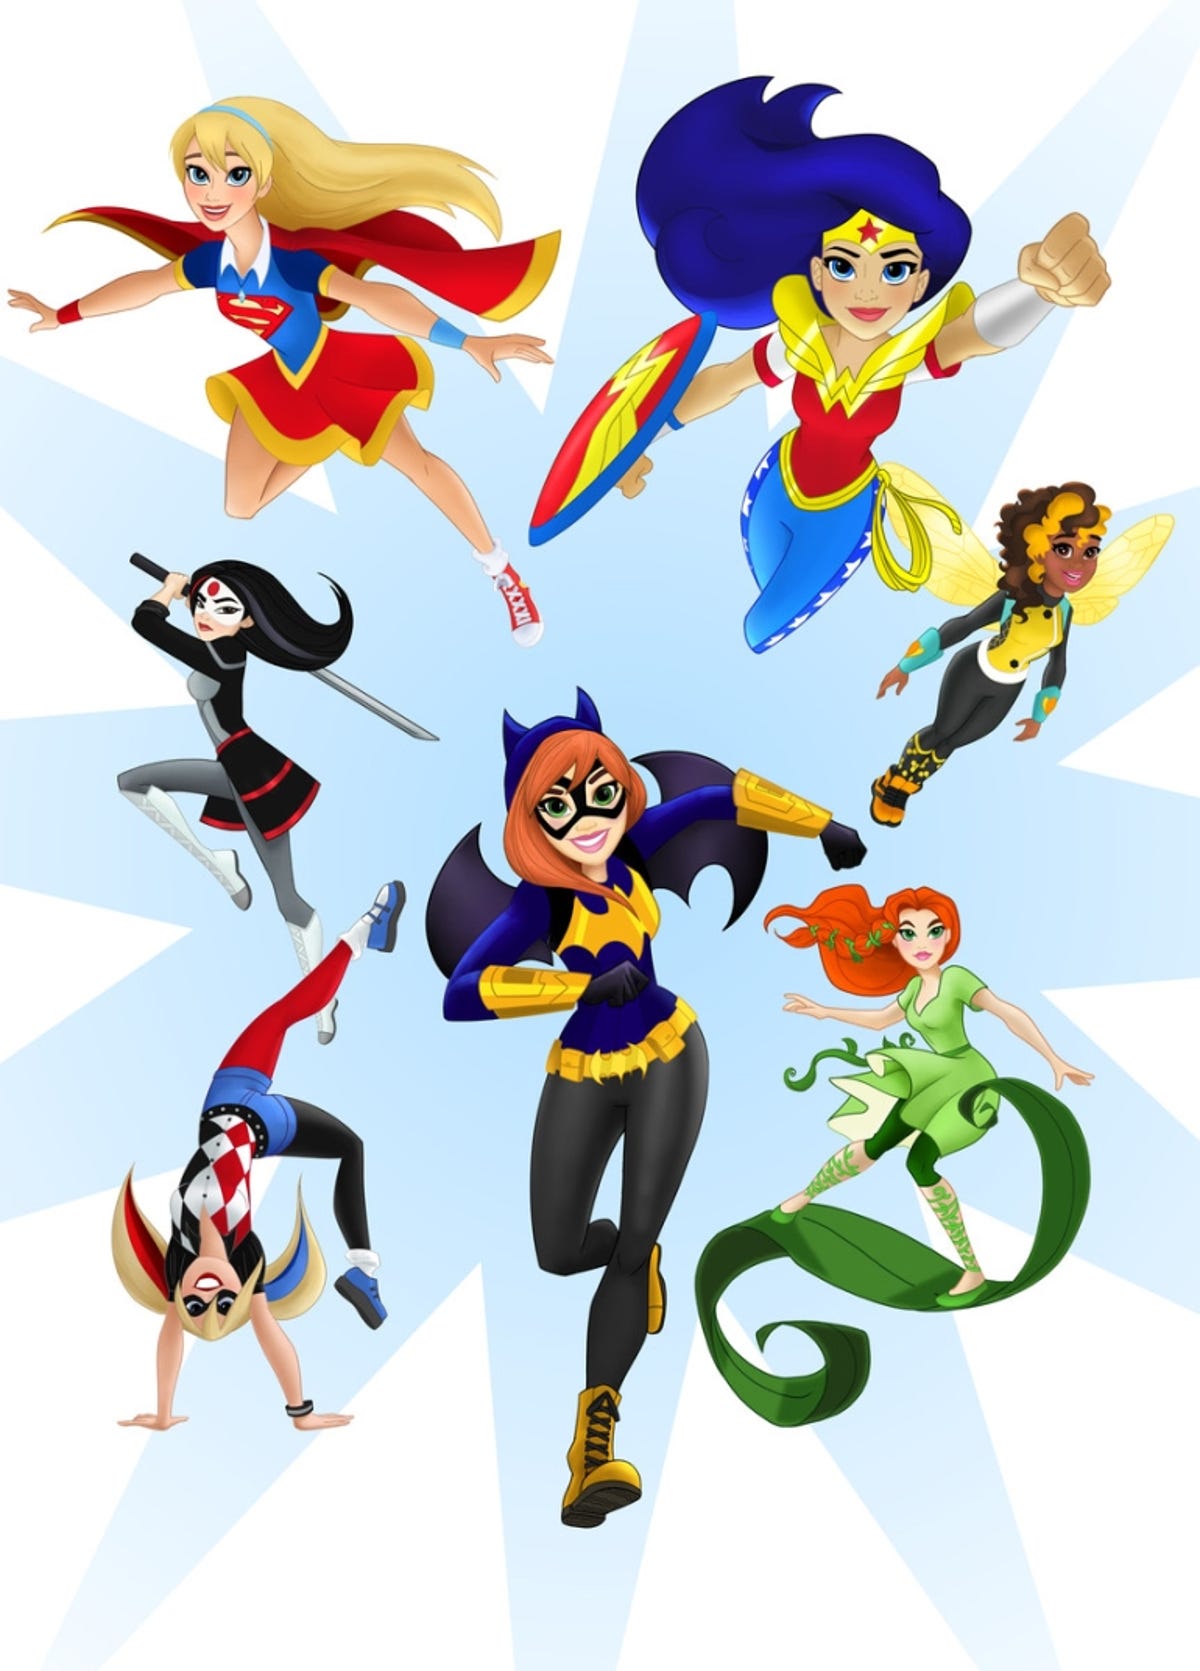 DC Comics and Mattel team up for superhero action figures for girls - CNET